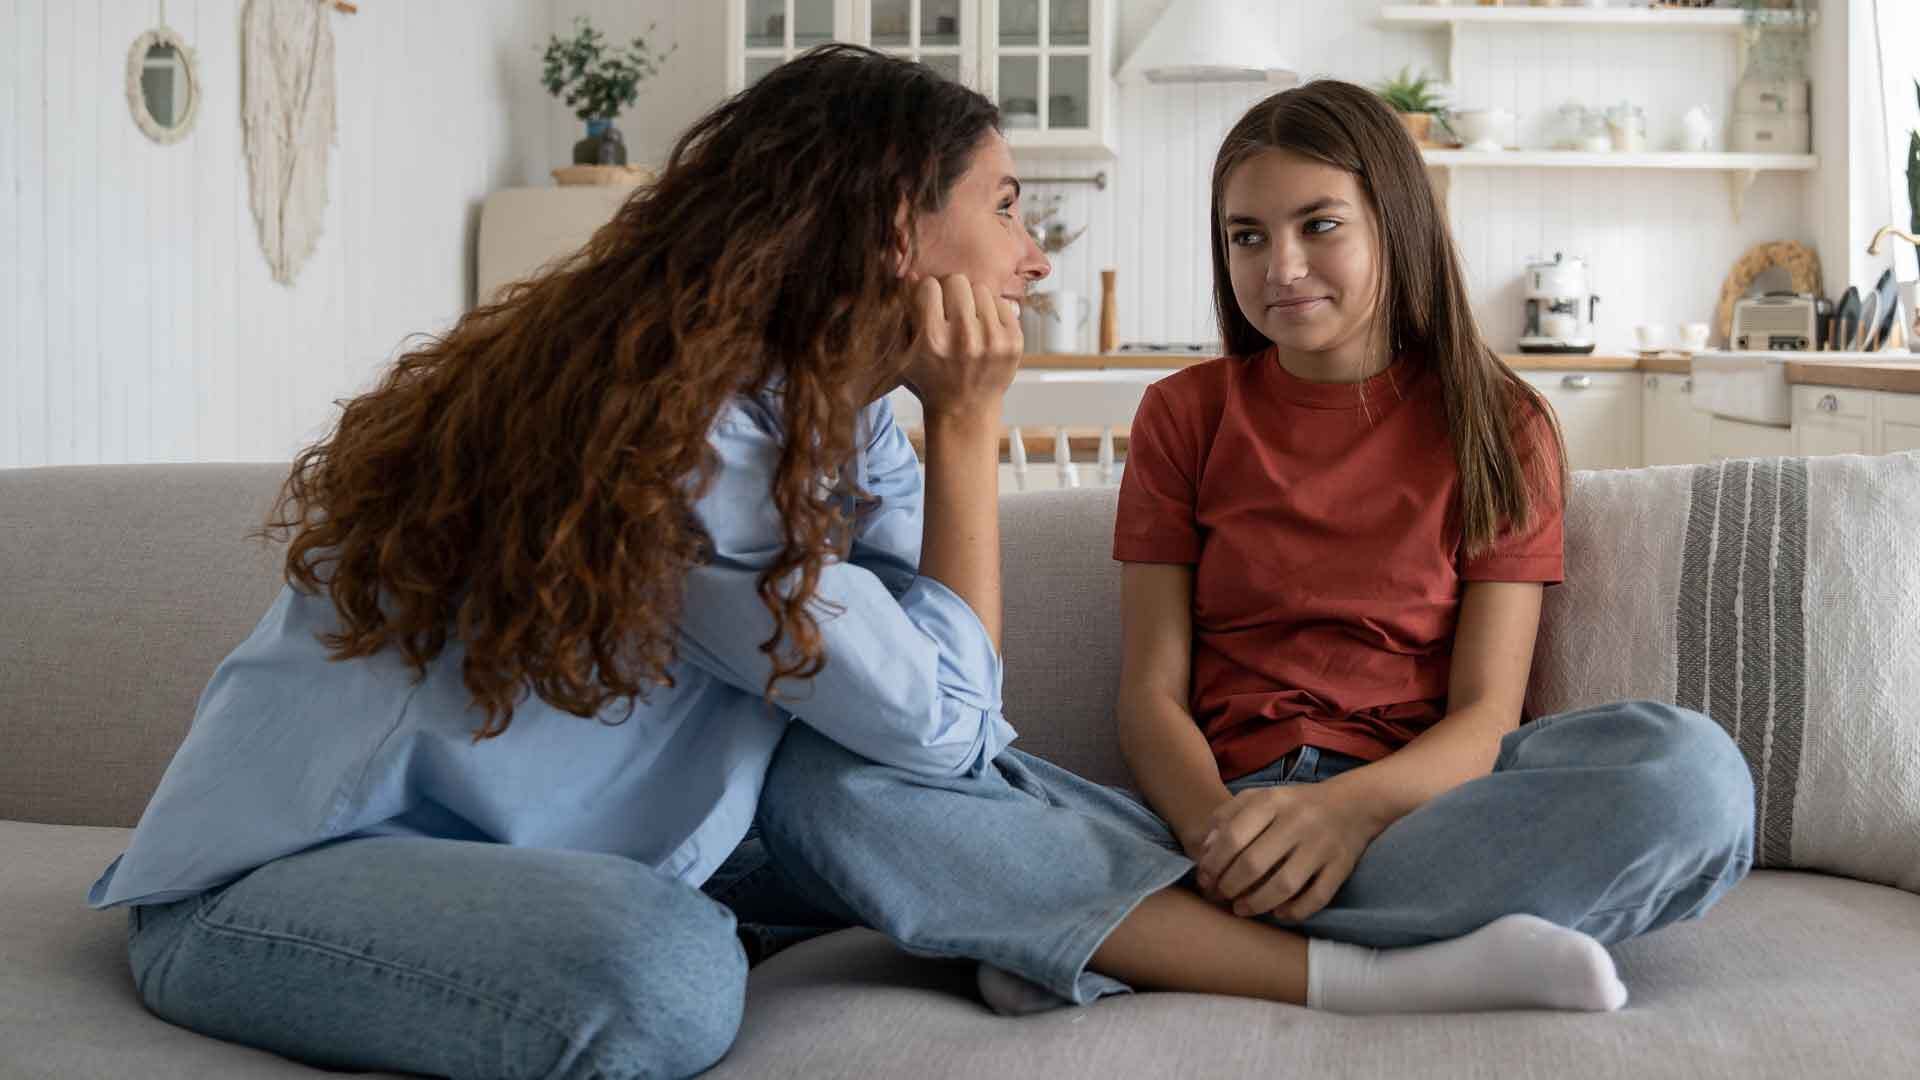 Sex education for children: When do I talk to my child about sex and Co.